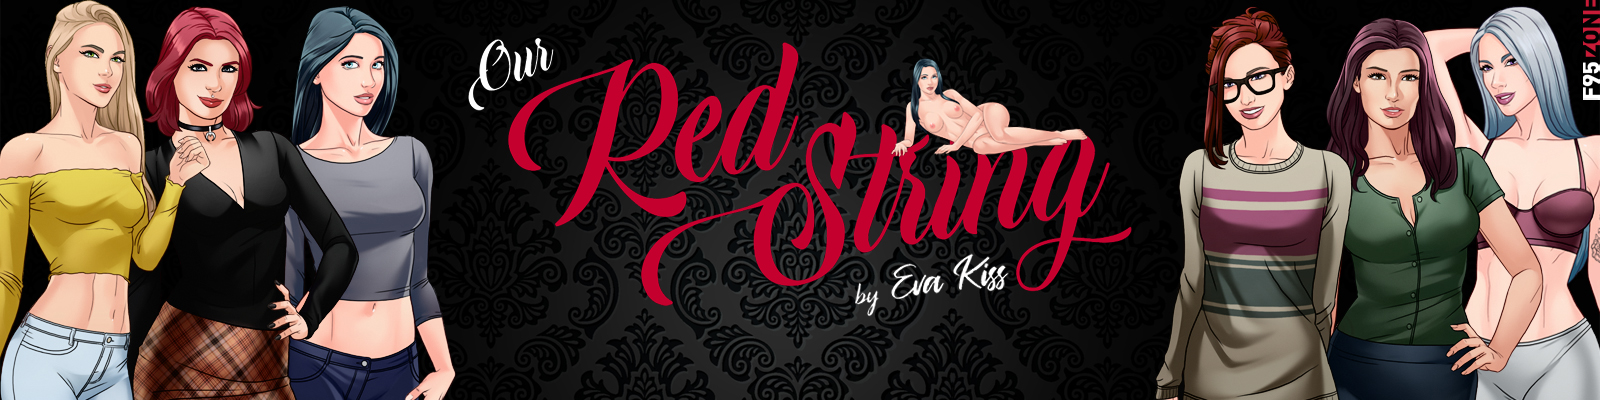 615322 Our Red String